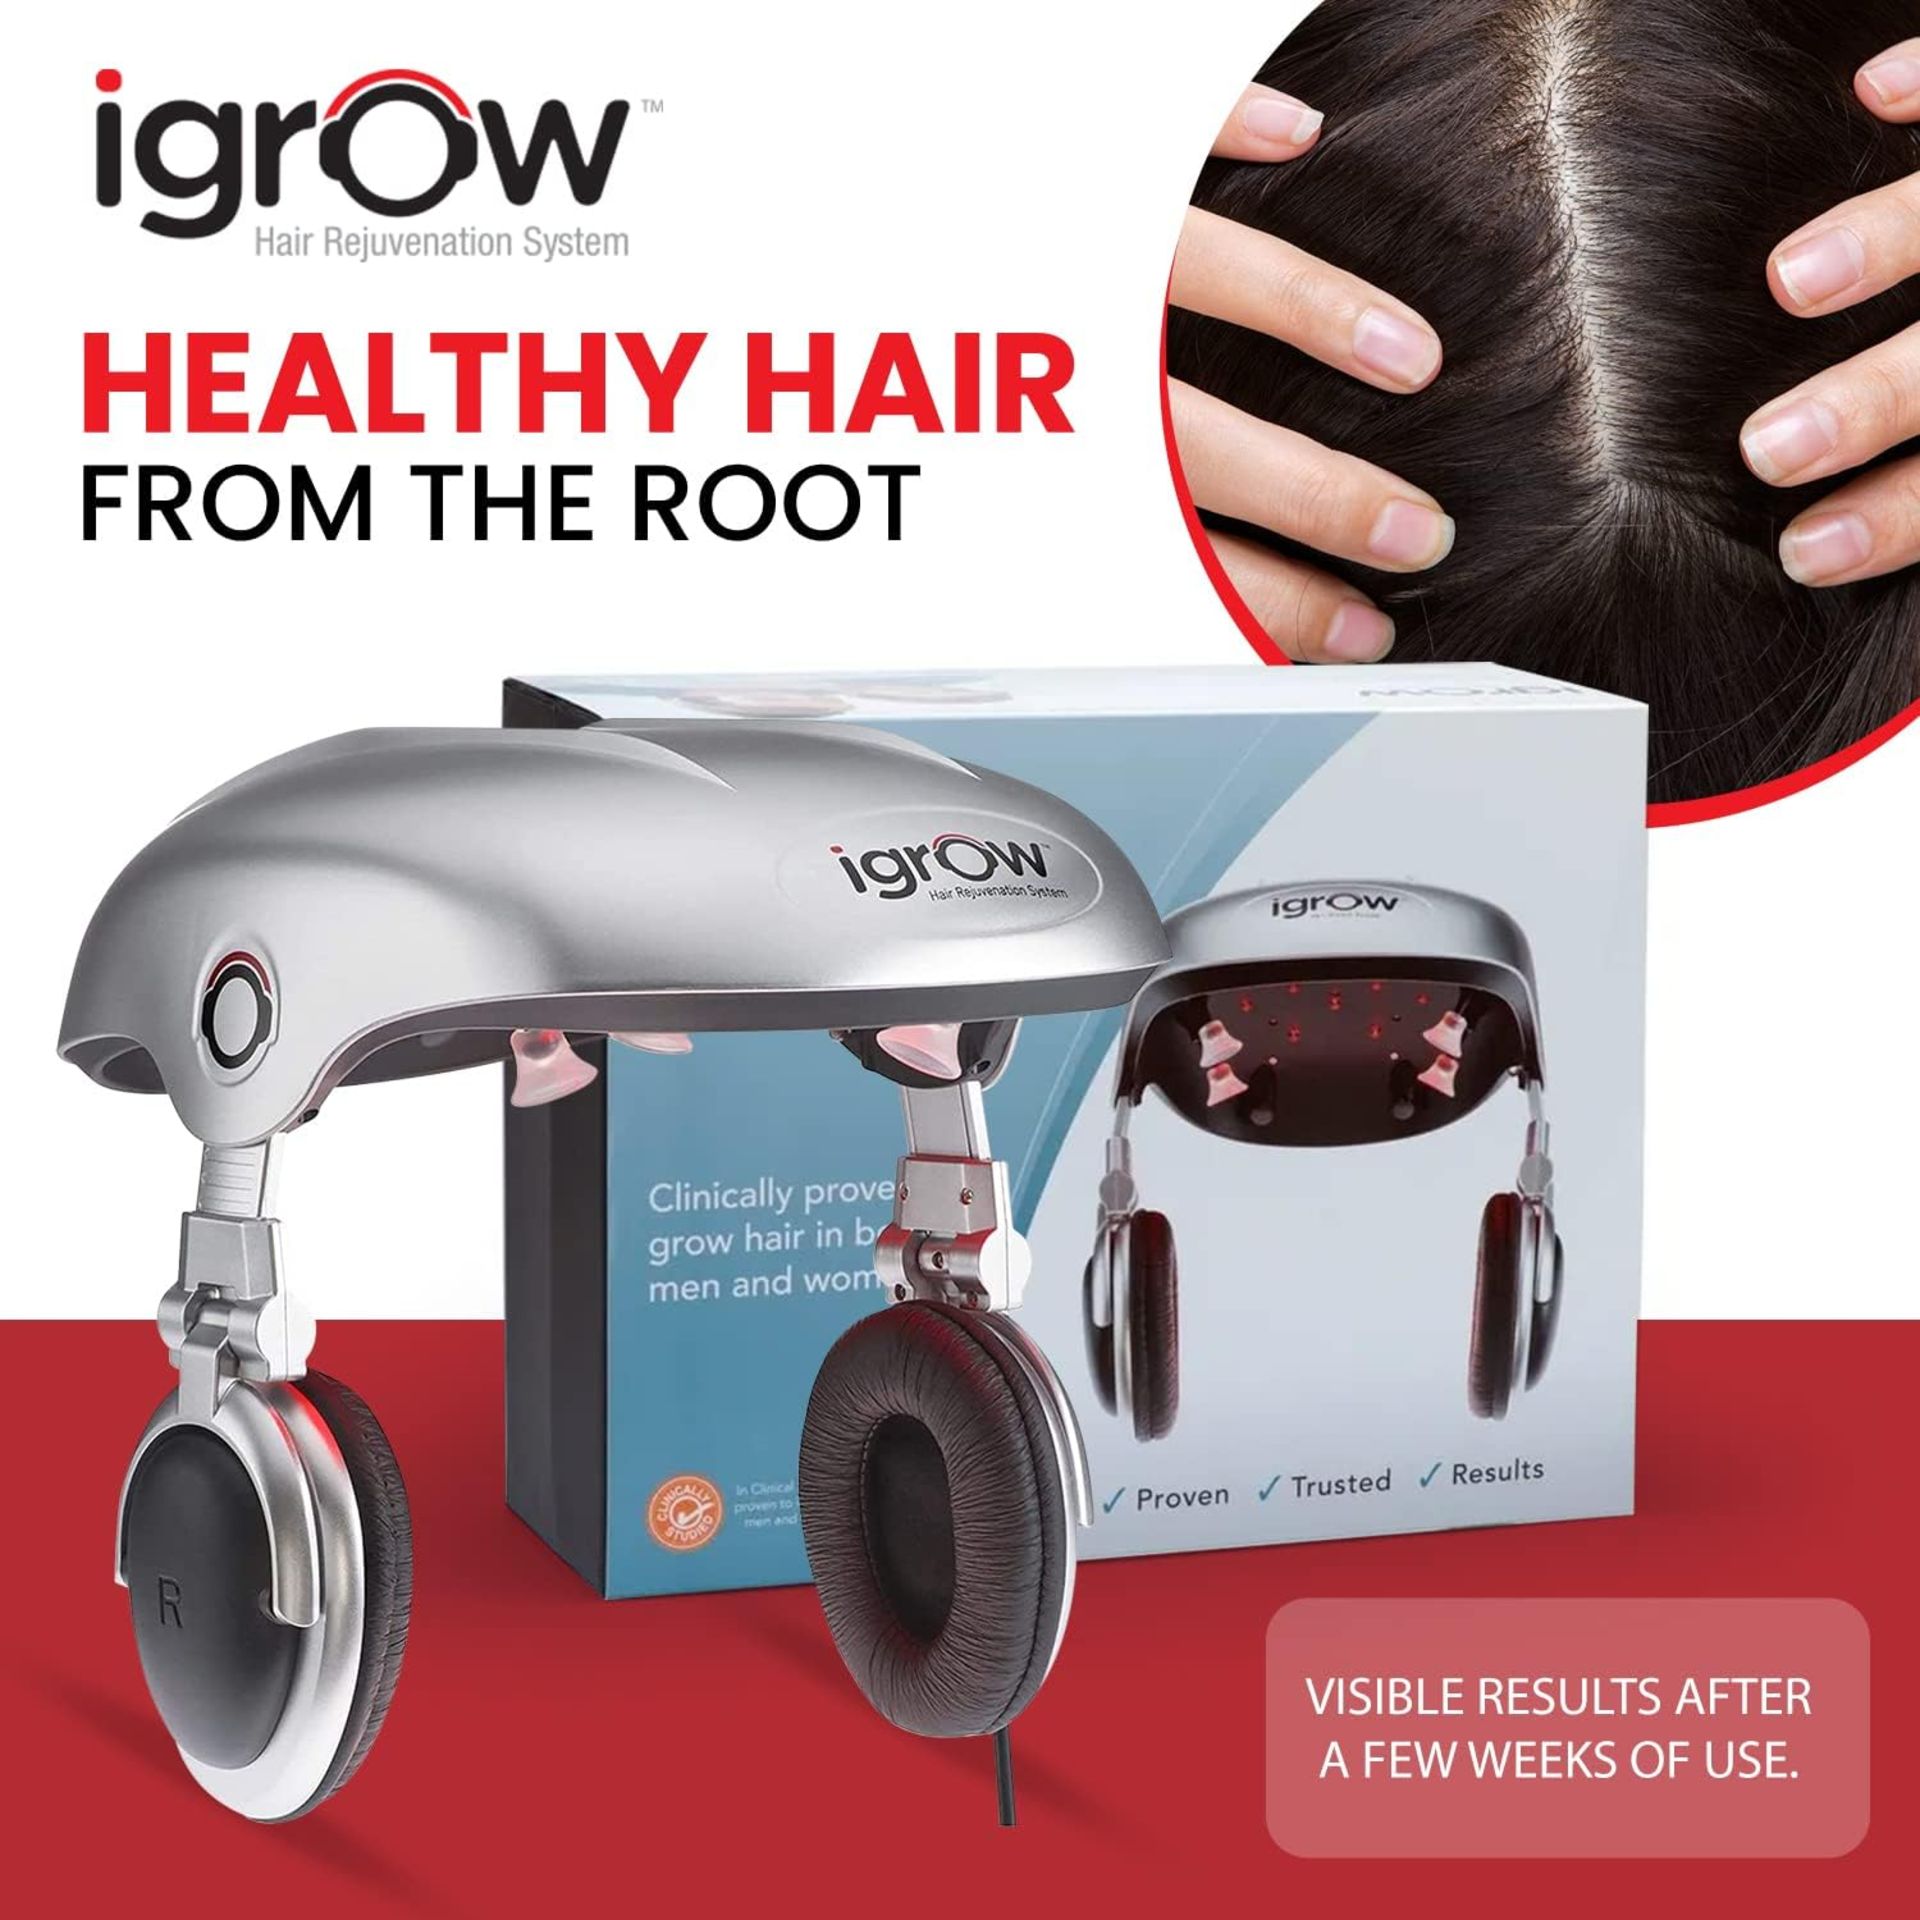 Brand New iGrow Professional Laser Hair Growth System - FDA Cleared Laser Cap Hair Growth for - Image 3 of 5